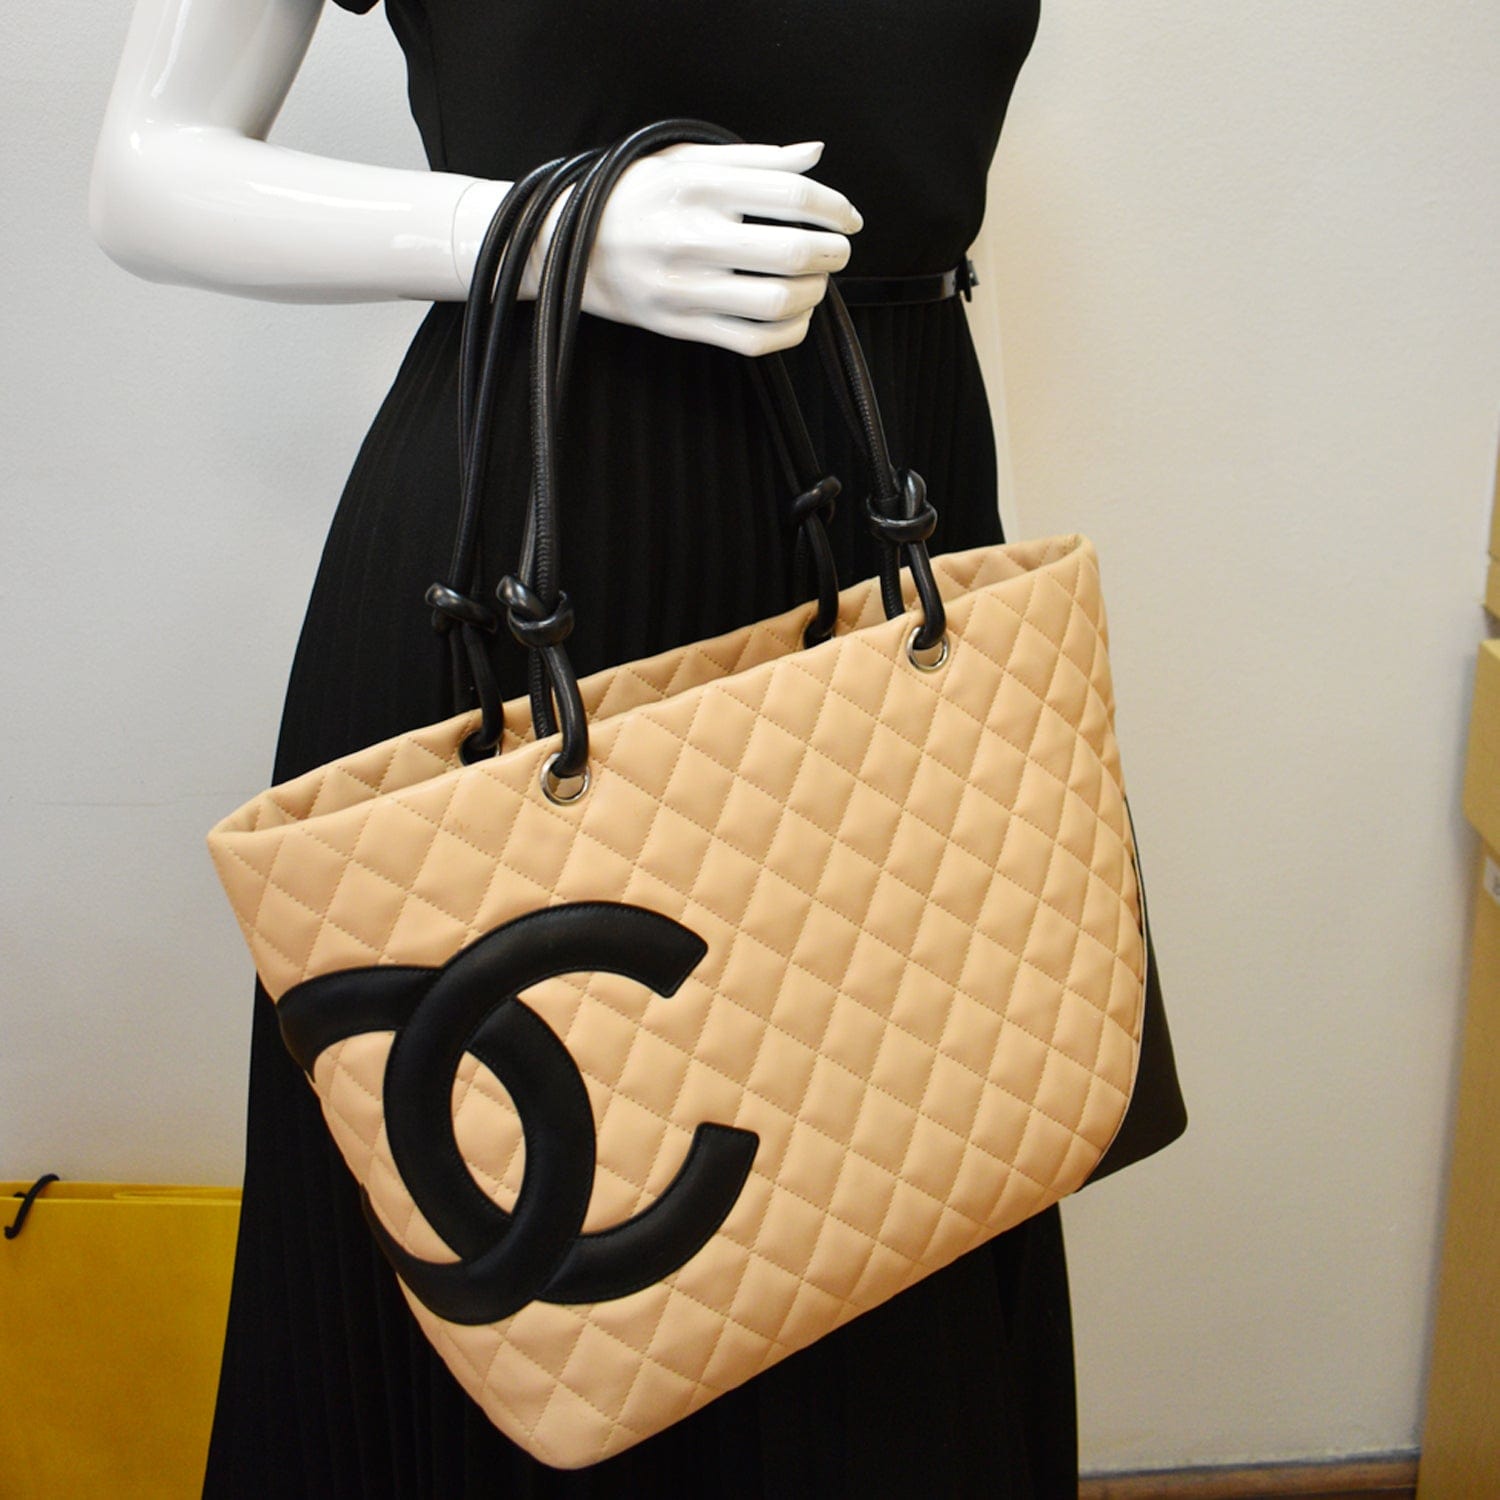 Chanel - Authenticated Cambon Handbag - Leather Beige Plain for Women, Good Condition